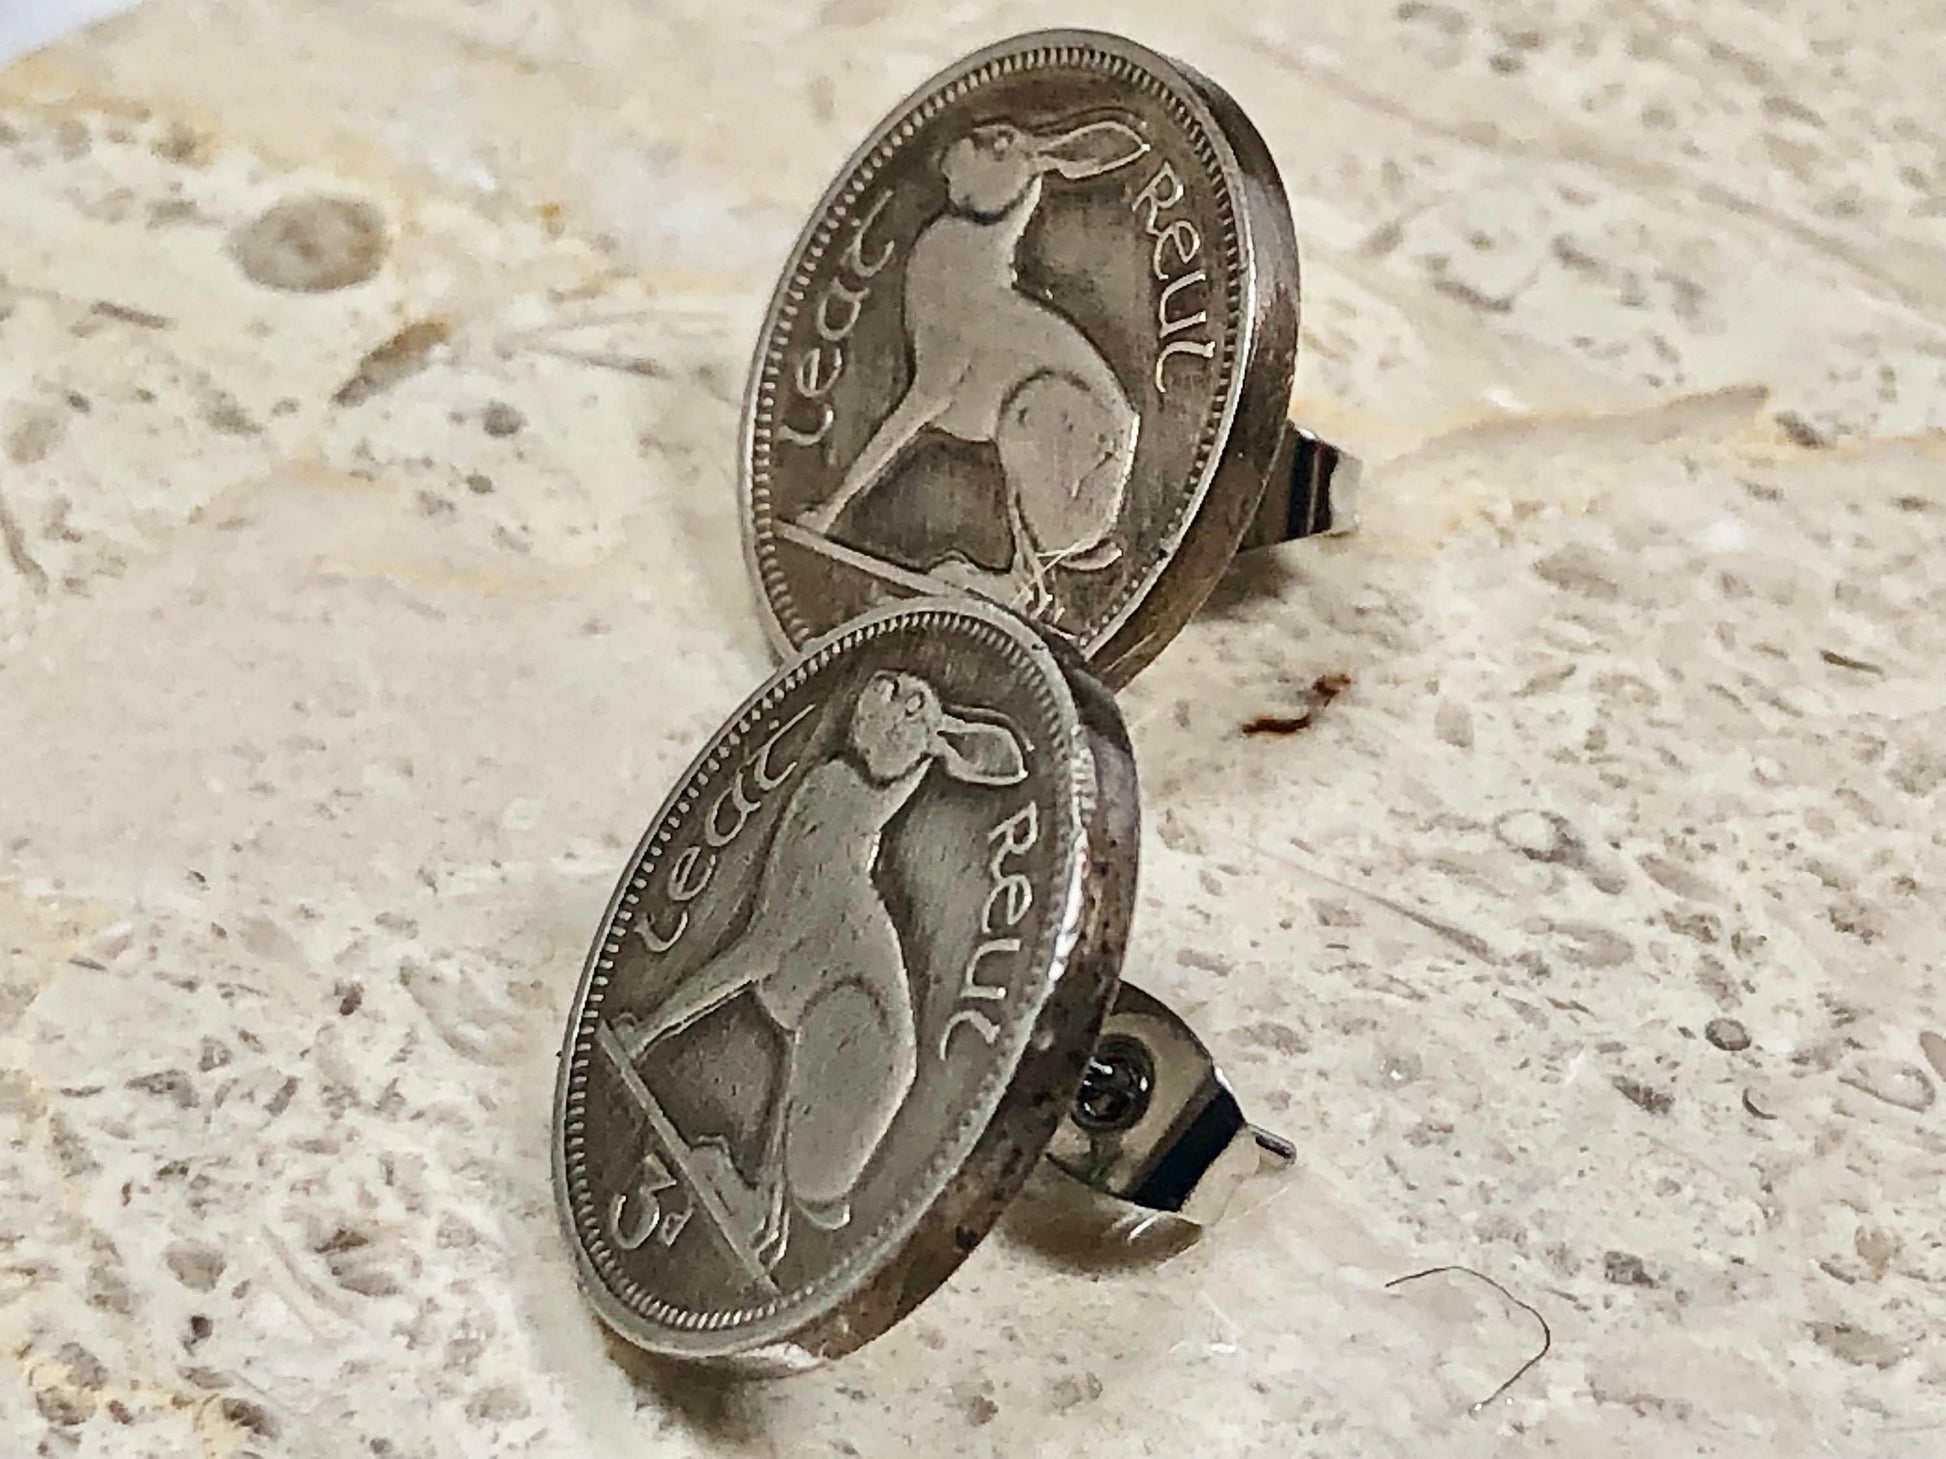 Ireland Coin Stud Earrings Irish 3 Pence Rabbit Hare Personal Vintage Handmade Jewelry Gift Friend Charm For Him Her World Coin Collector